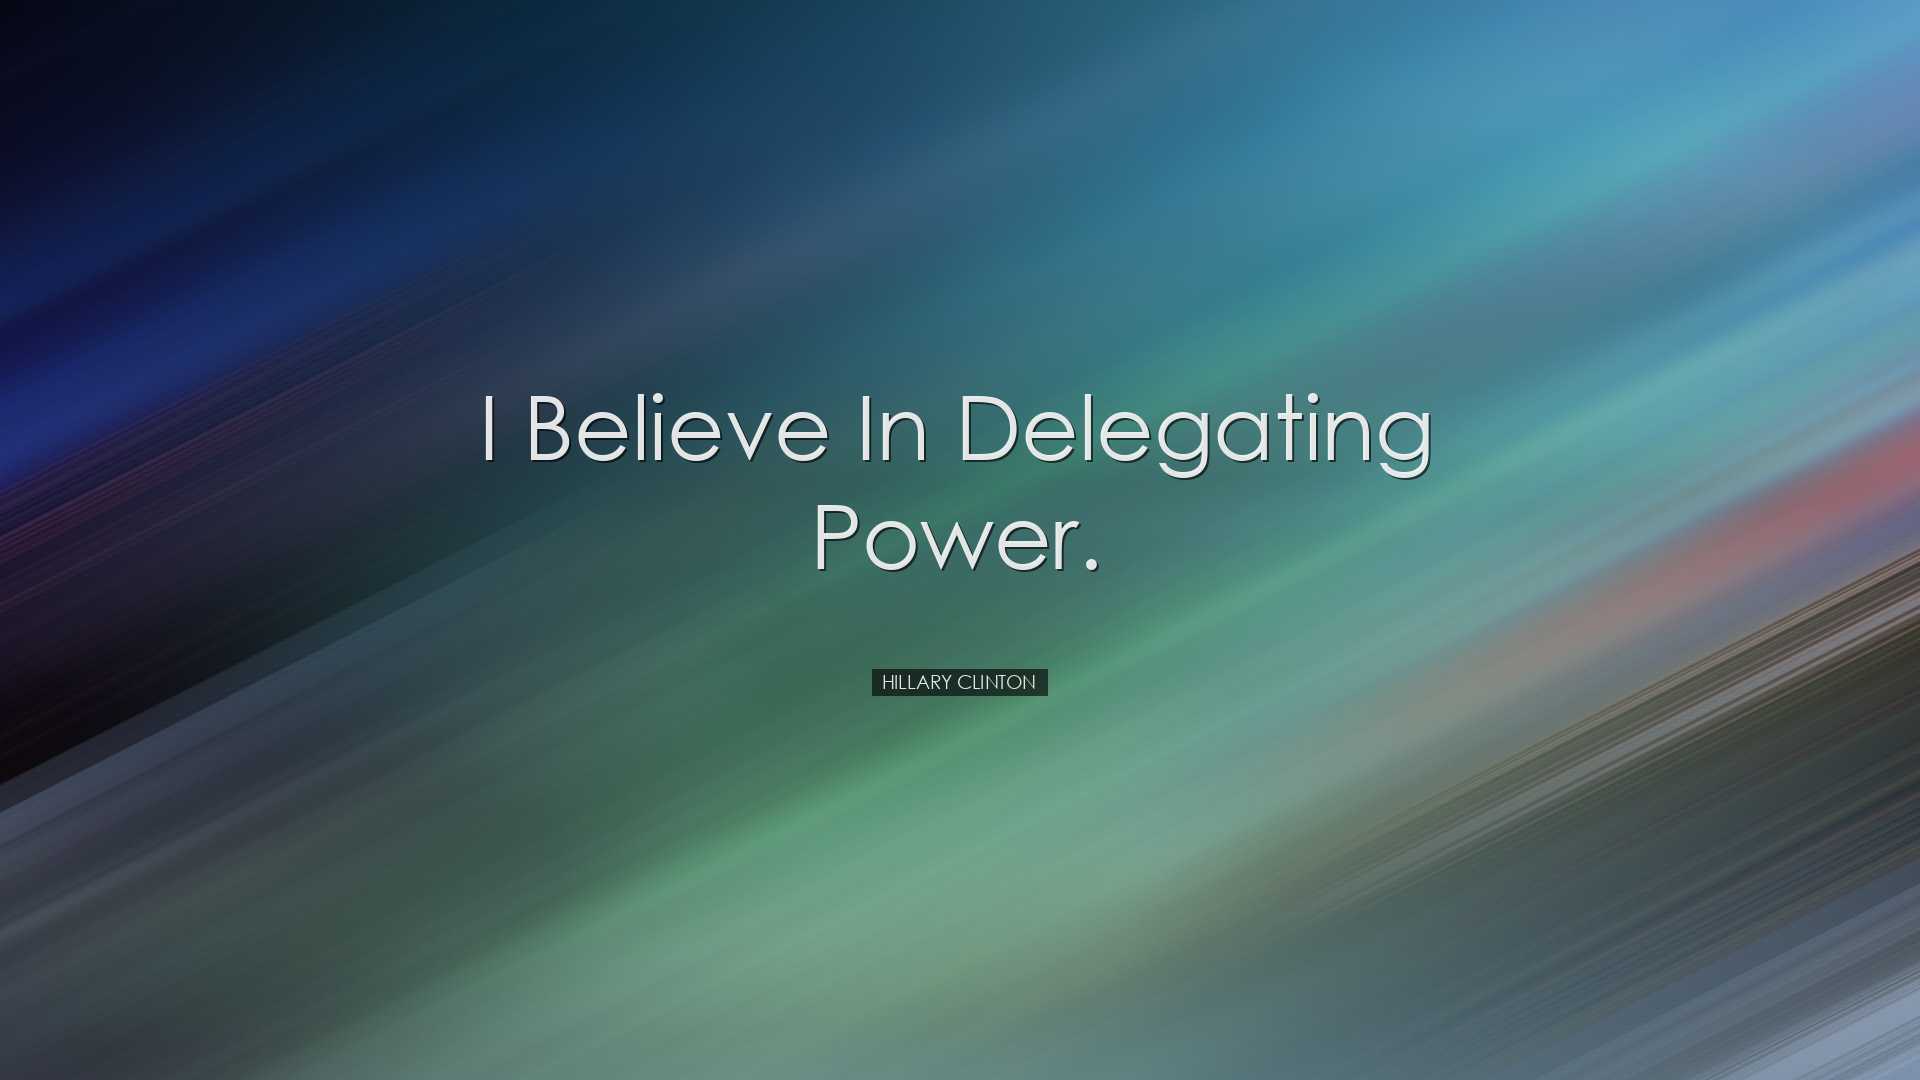 I believe in delegating power. - Hillary Clinton